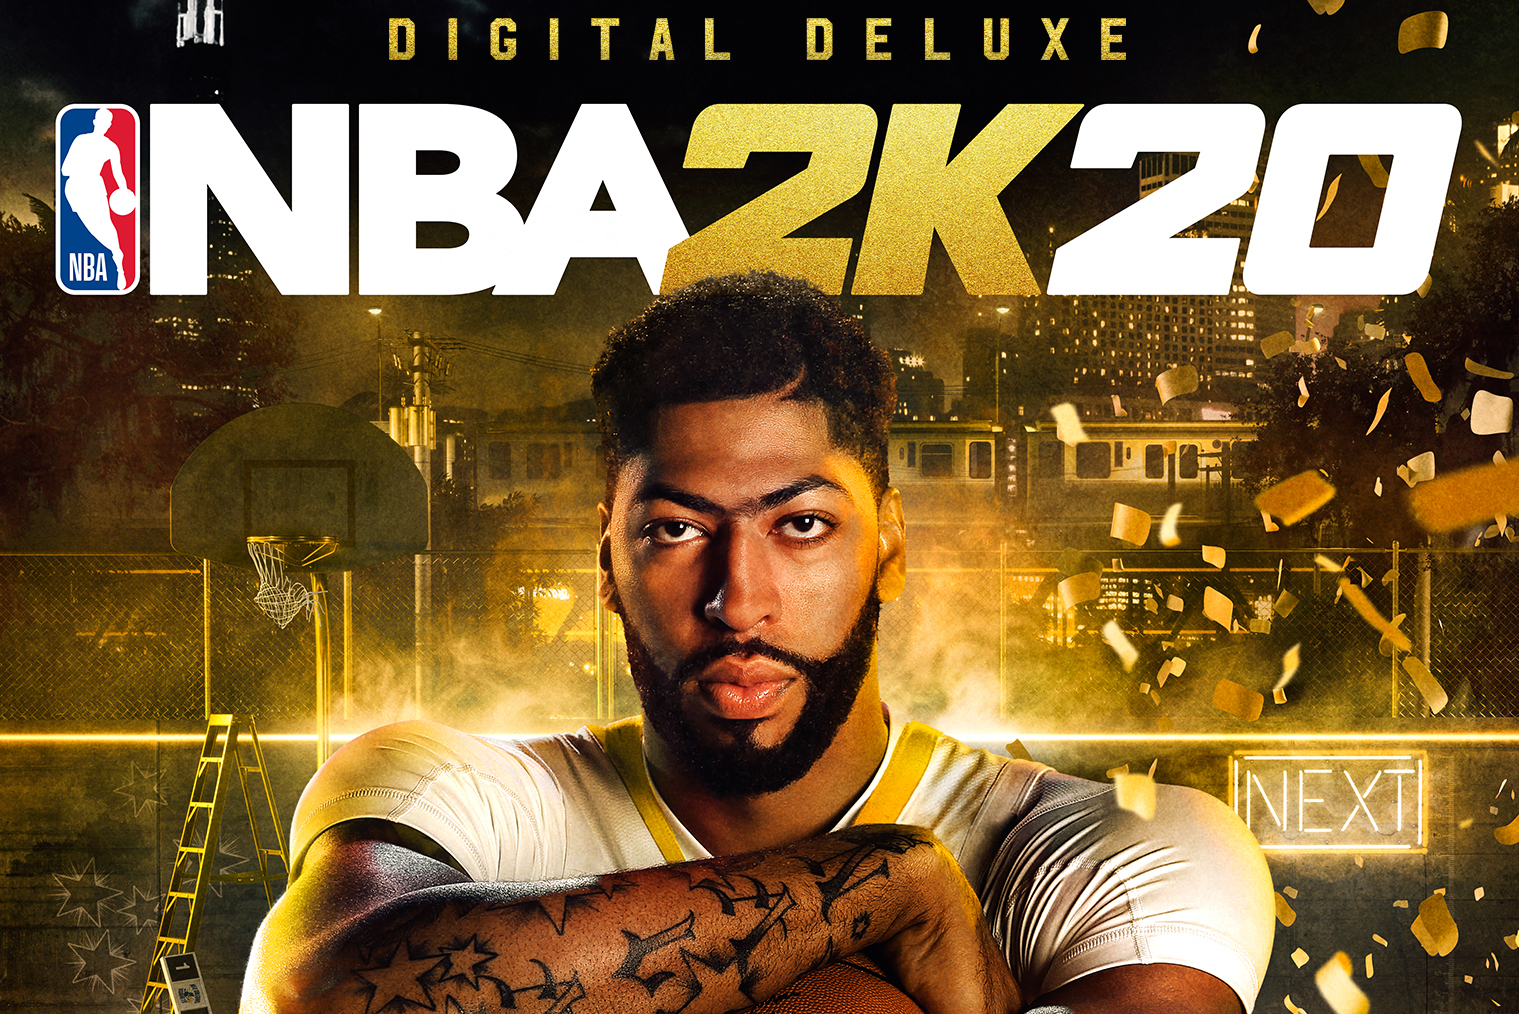 Nba 2k20 Anthony Davis Dwyane Wade Covers Release Date Trailer And Details Bleacher Report Latest News Videos And Highlights